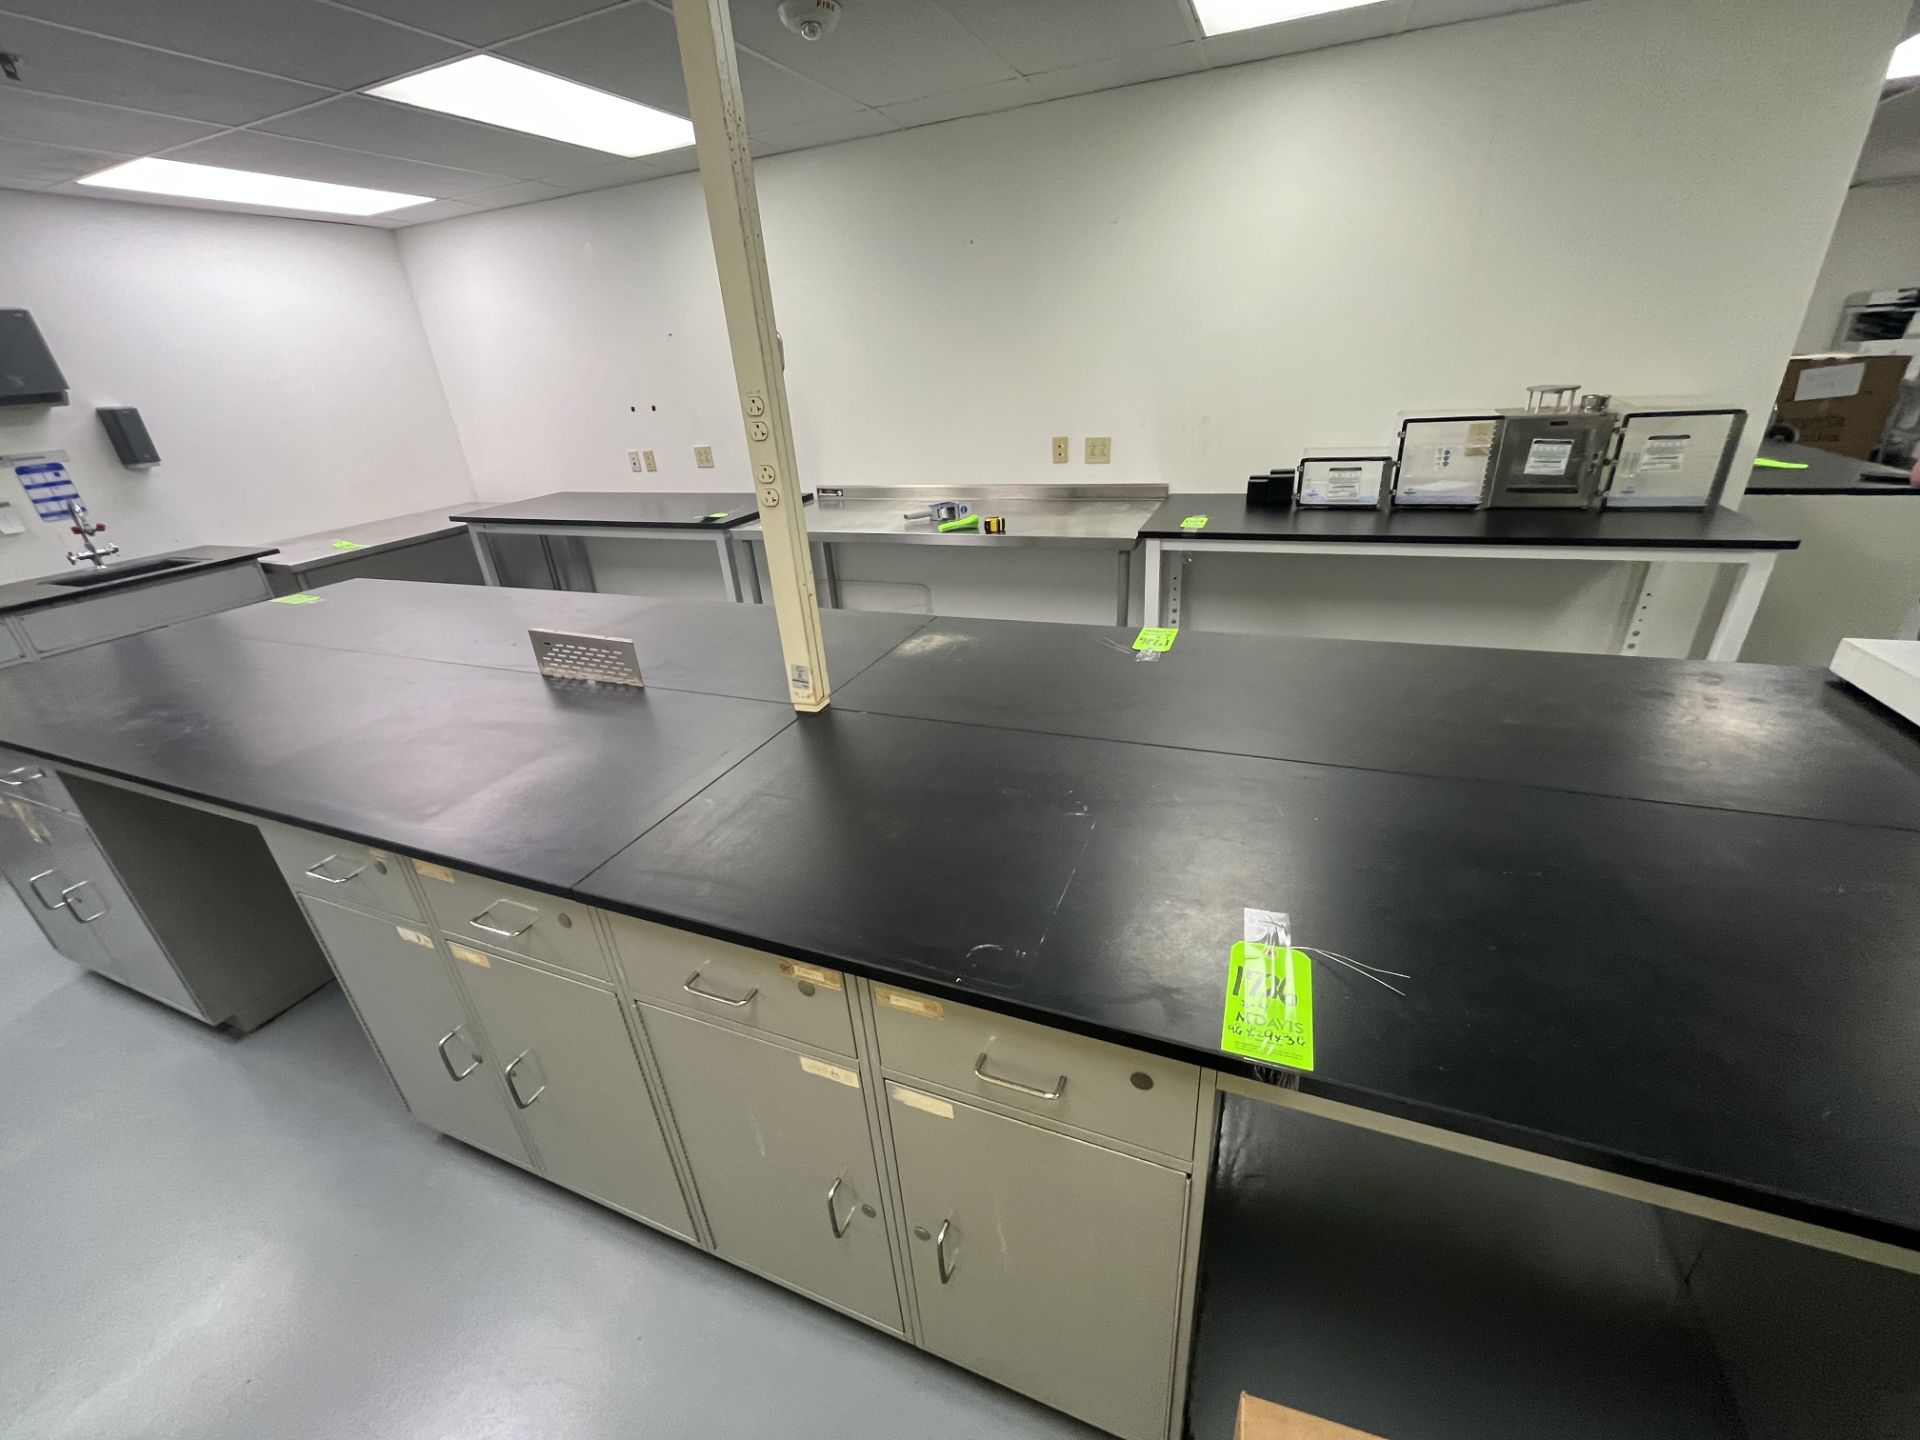 (4) ACID RESISTANT LAB COUNTER TABLE (112 Technology Dr., Coraopolis, PA 15108) (RIGGING AND - Image 3 of 4